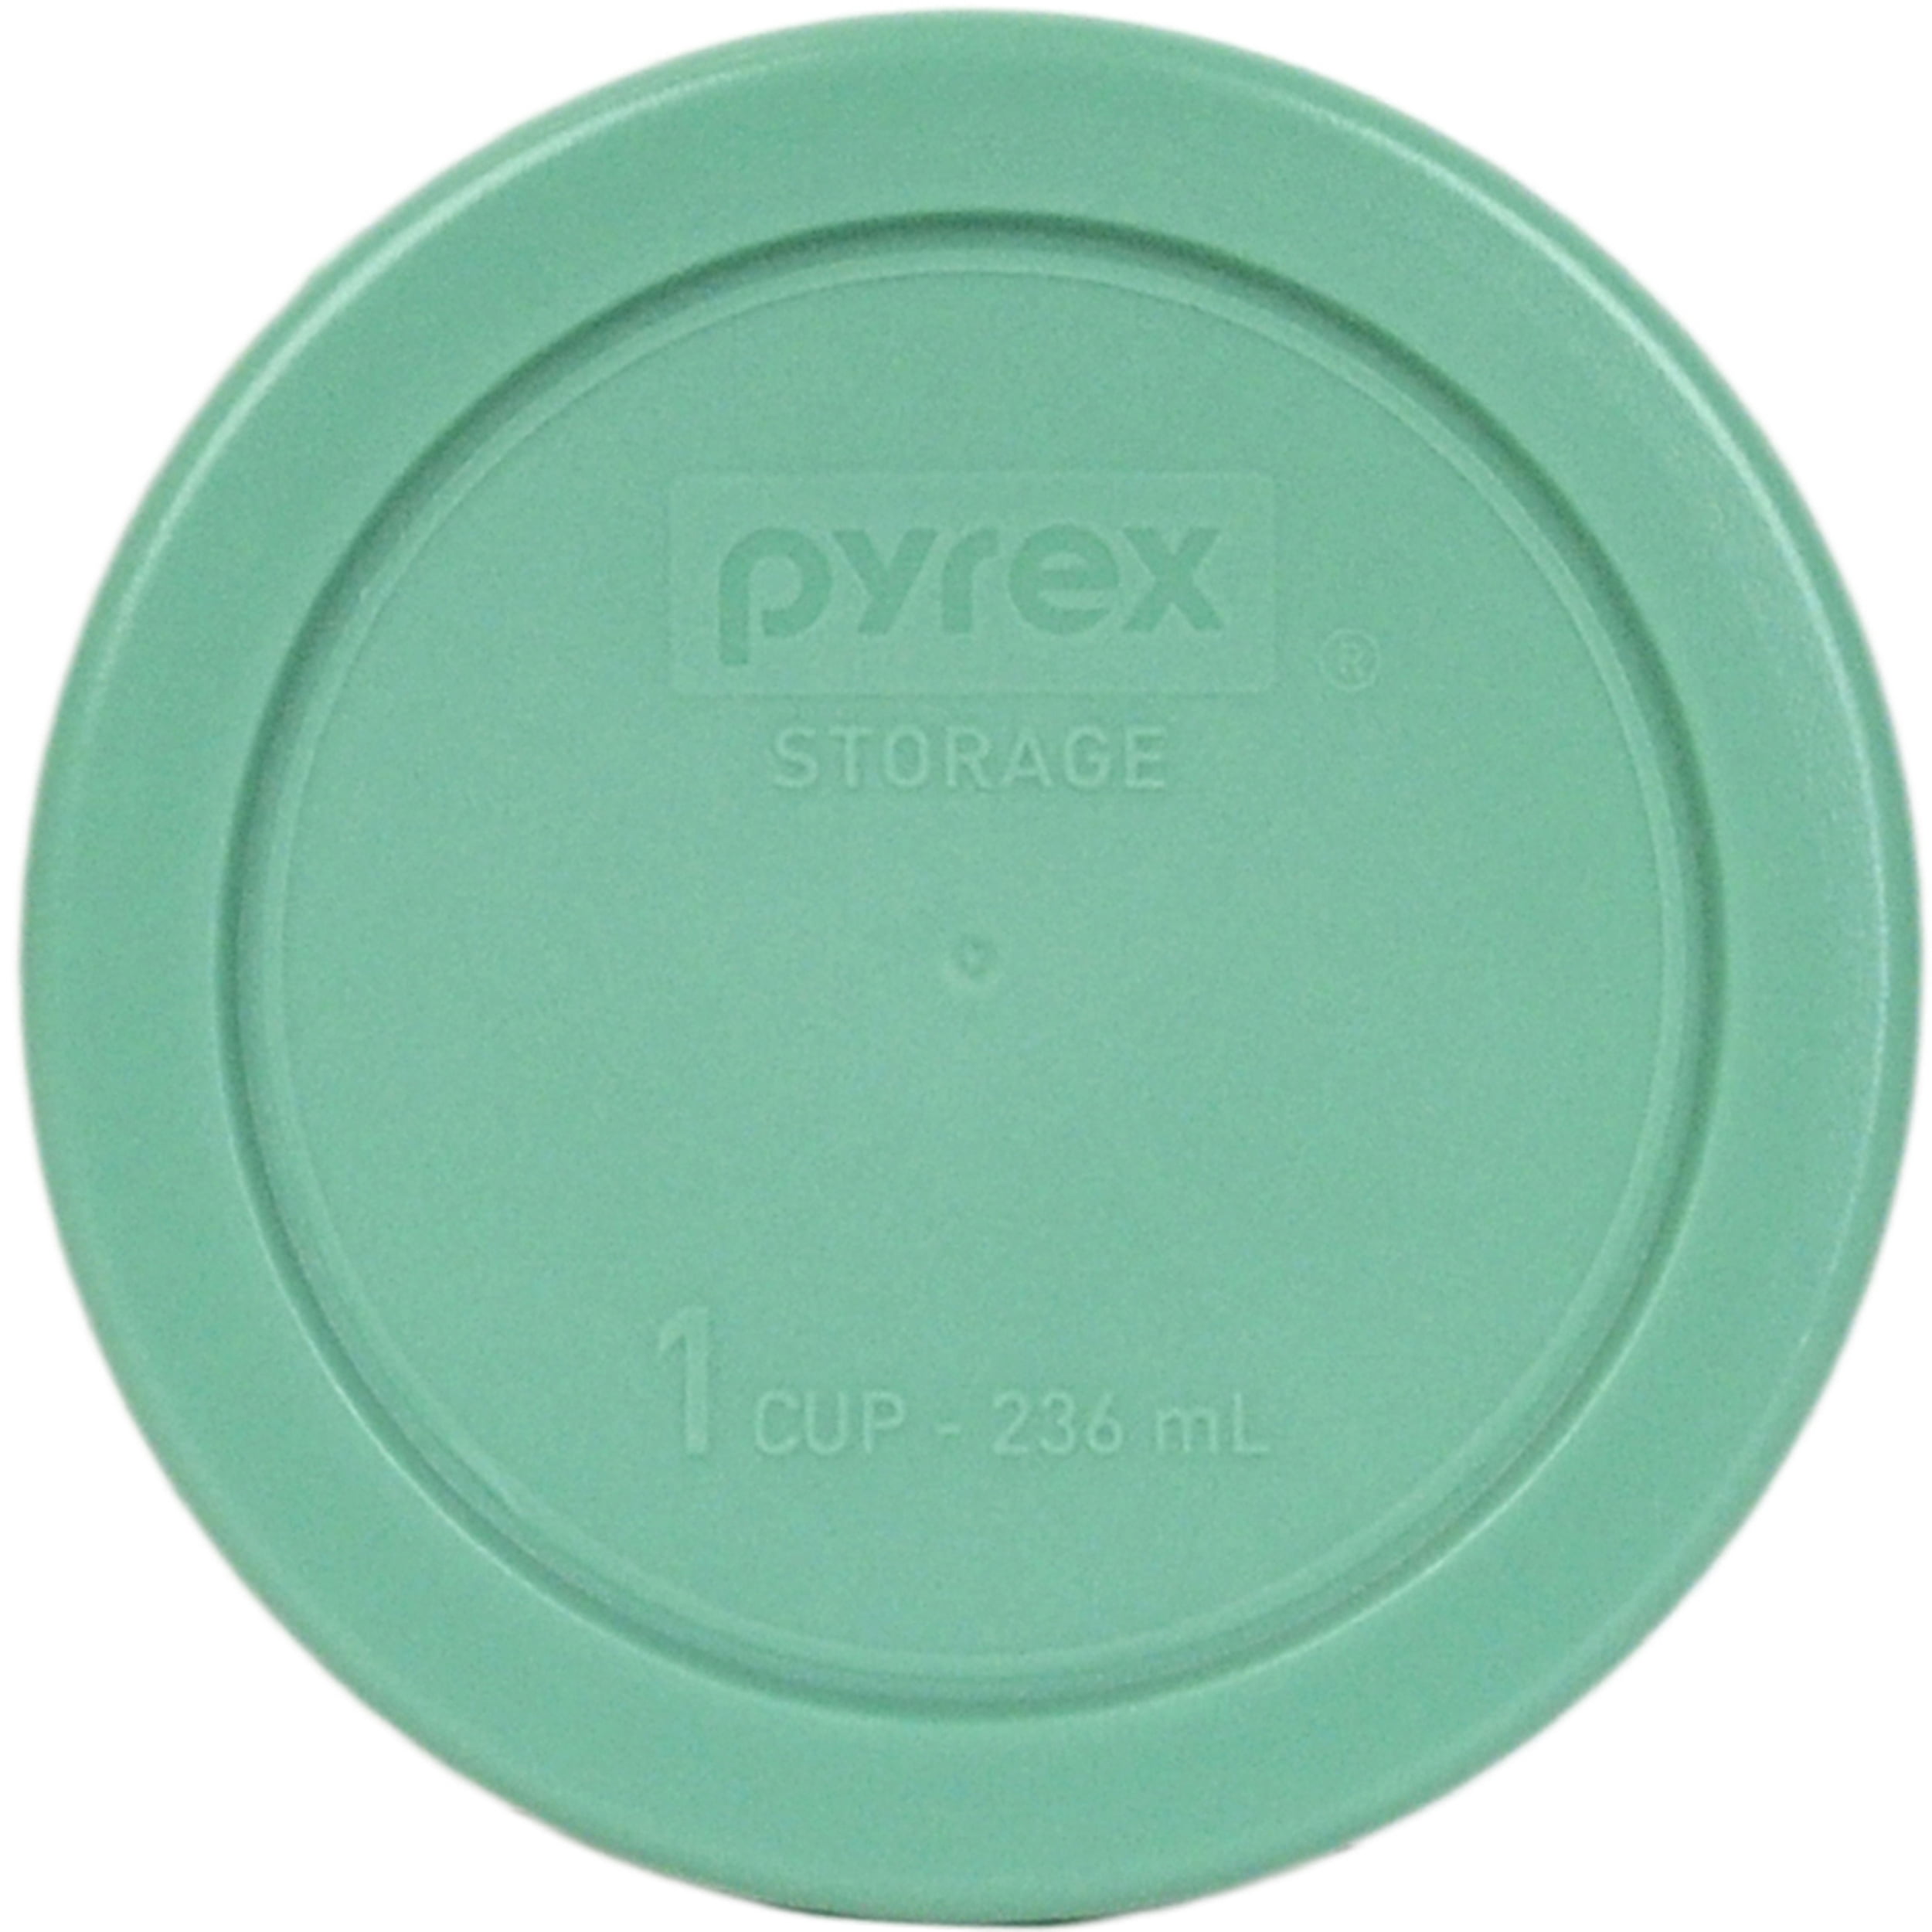 Pyrex 7202-PC 1 Cup Round Plastic Red Storage Cover Lids 10PK for Glass Bowl New 